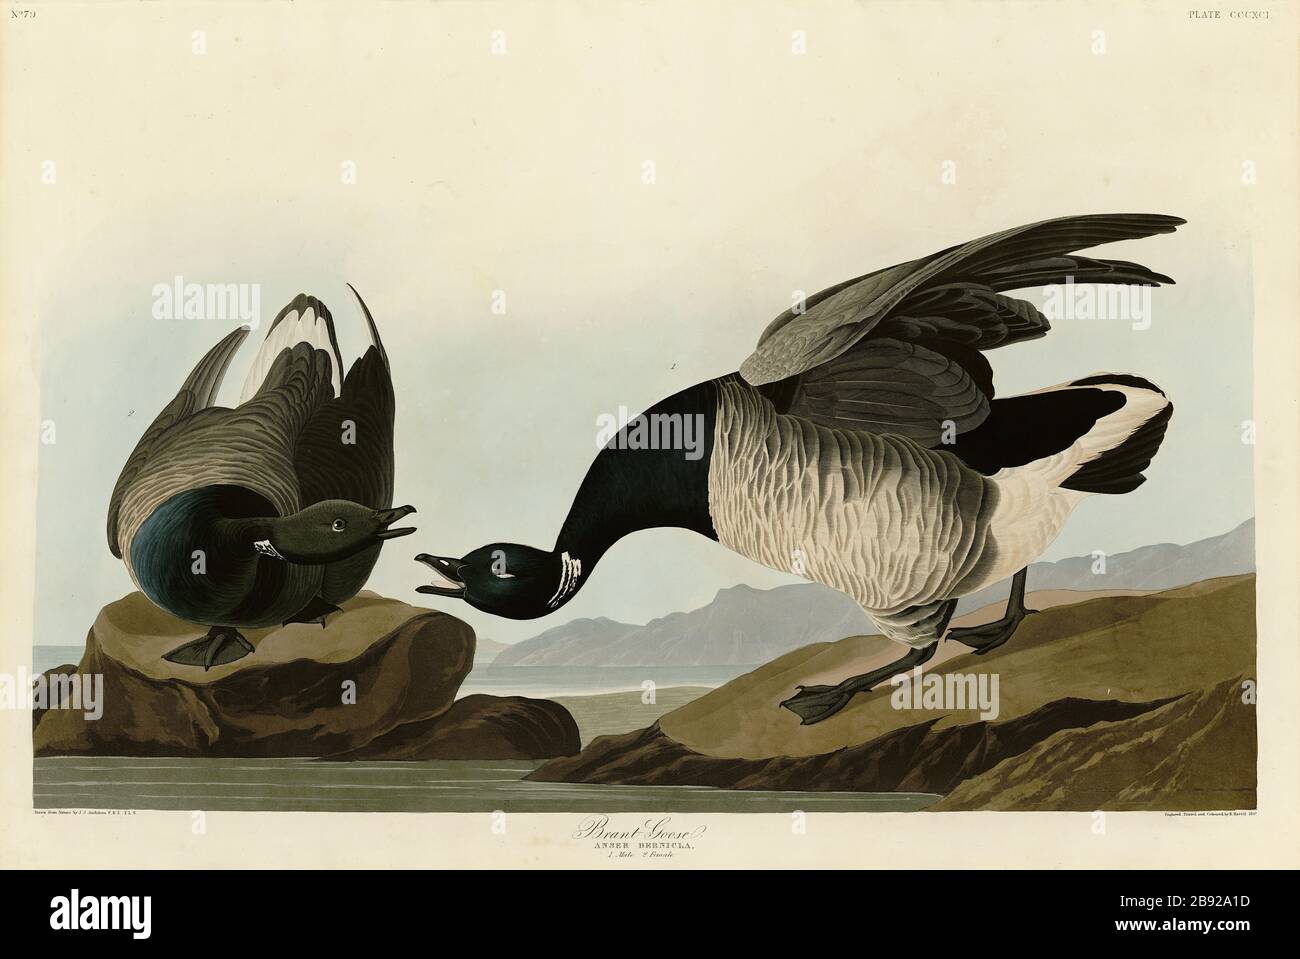 Plate 391 Brant Goose, from The Birds of America folio (1827–1839) by John James Audubon - Very high resolution and quality edited image Stock Photo